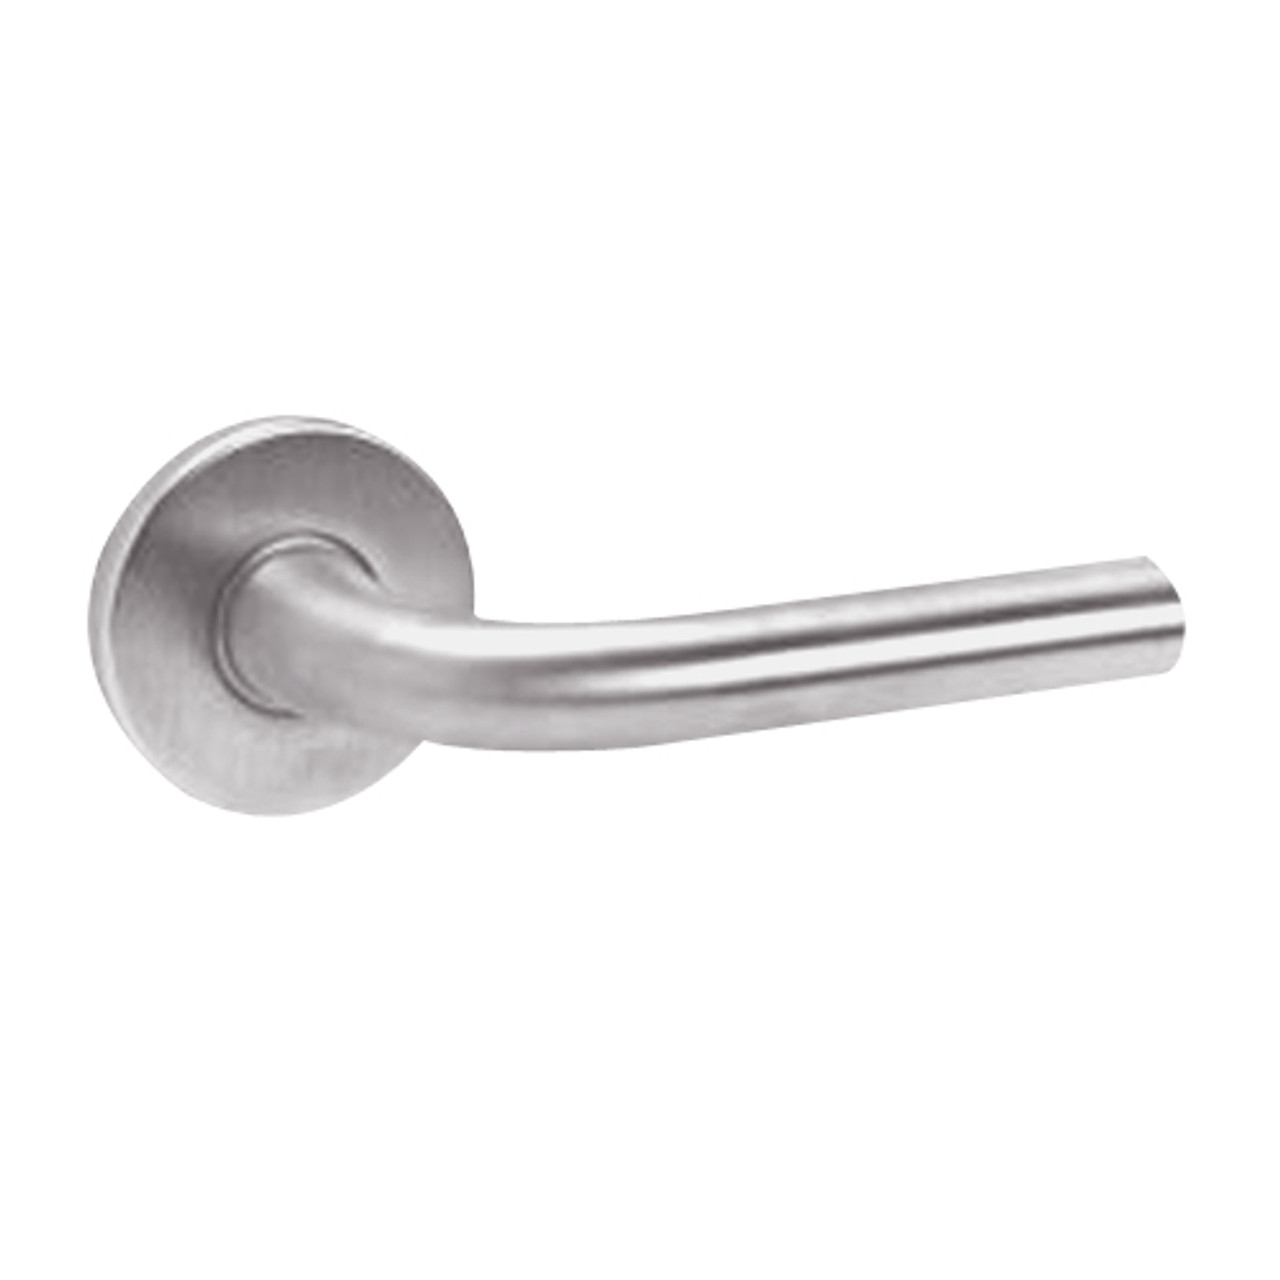 ML2069-RWB-630-M31 Corbin Russwin ML2000 Series Mortise Institution Privacy Trim Pack with Regis Lever in Satin Stainless